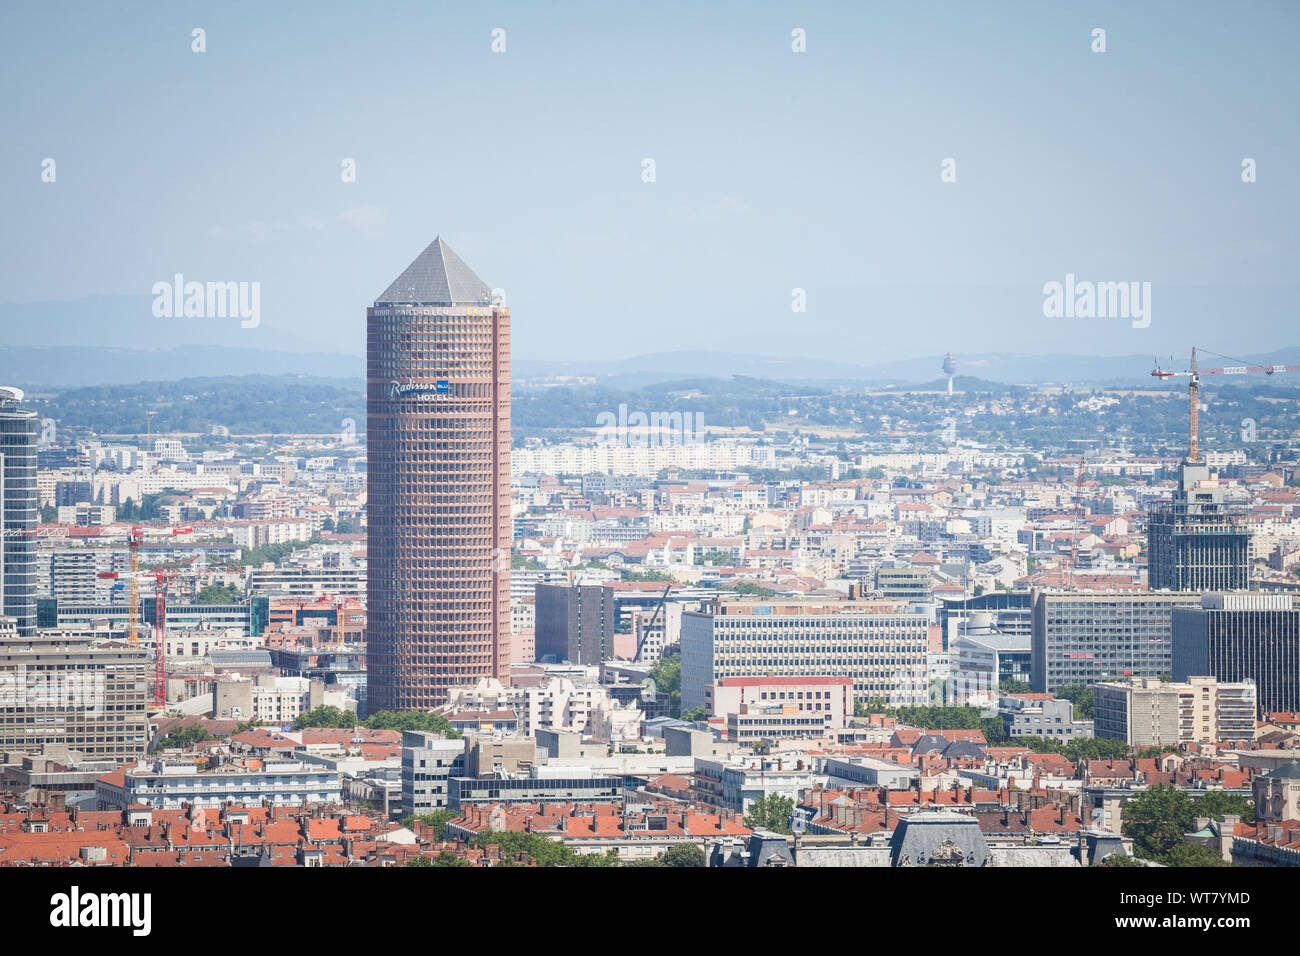 LYON, FRANCE - JULY 19, 2019: Aerial panoramic view of Lyon with the the iconic skyscraper of Le Crayon visible in front, a business high rise and Rad Stock Photo